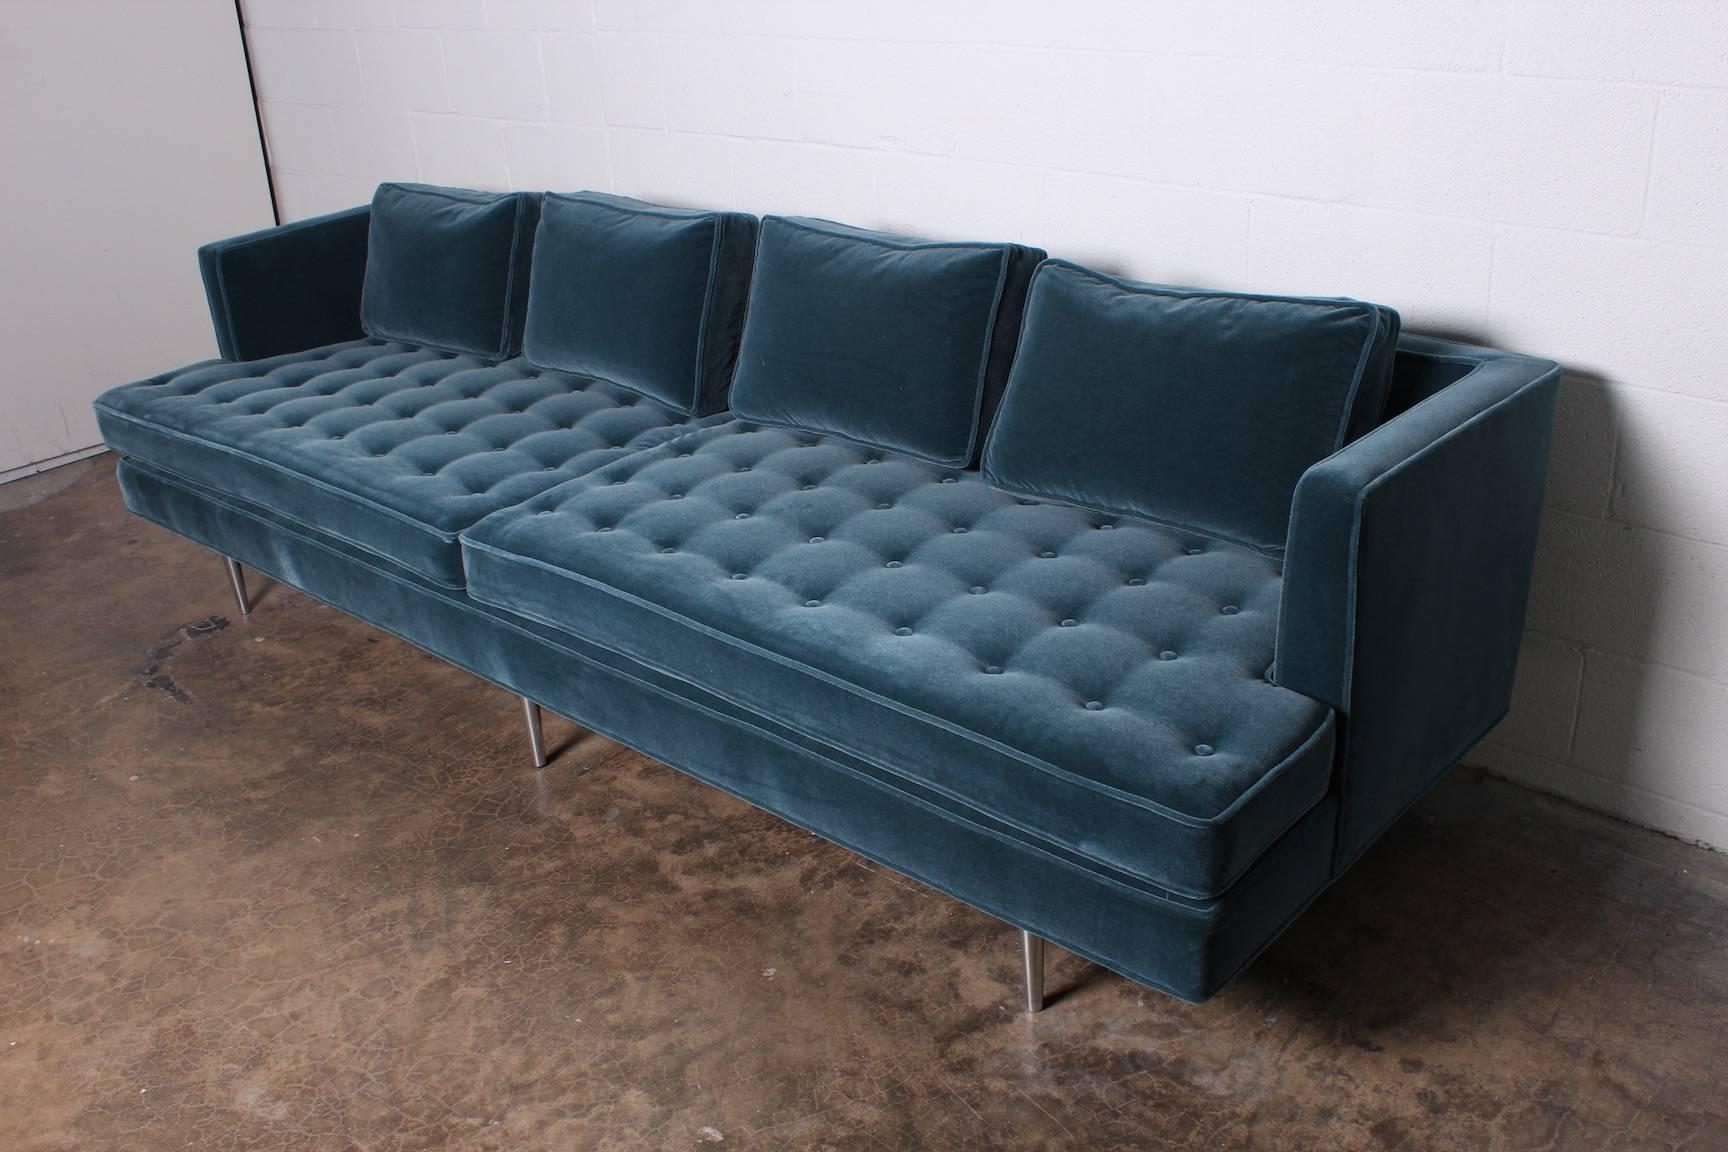 A Classic sofa design by Edward Wormley for Dunbar with polished nickel legs and fully restored in mohair upholstery with down back pillows.